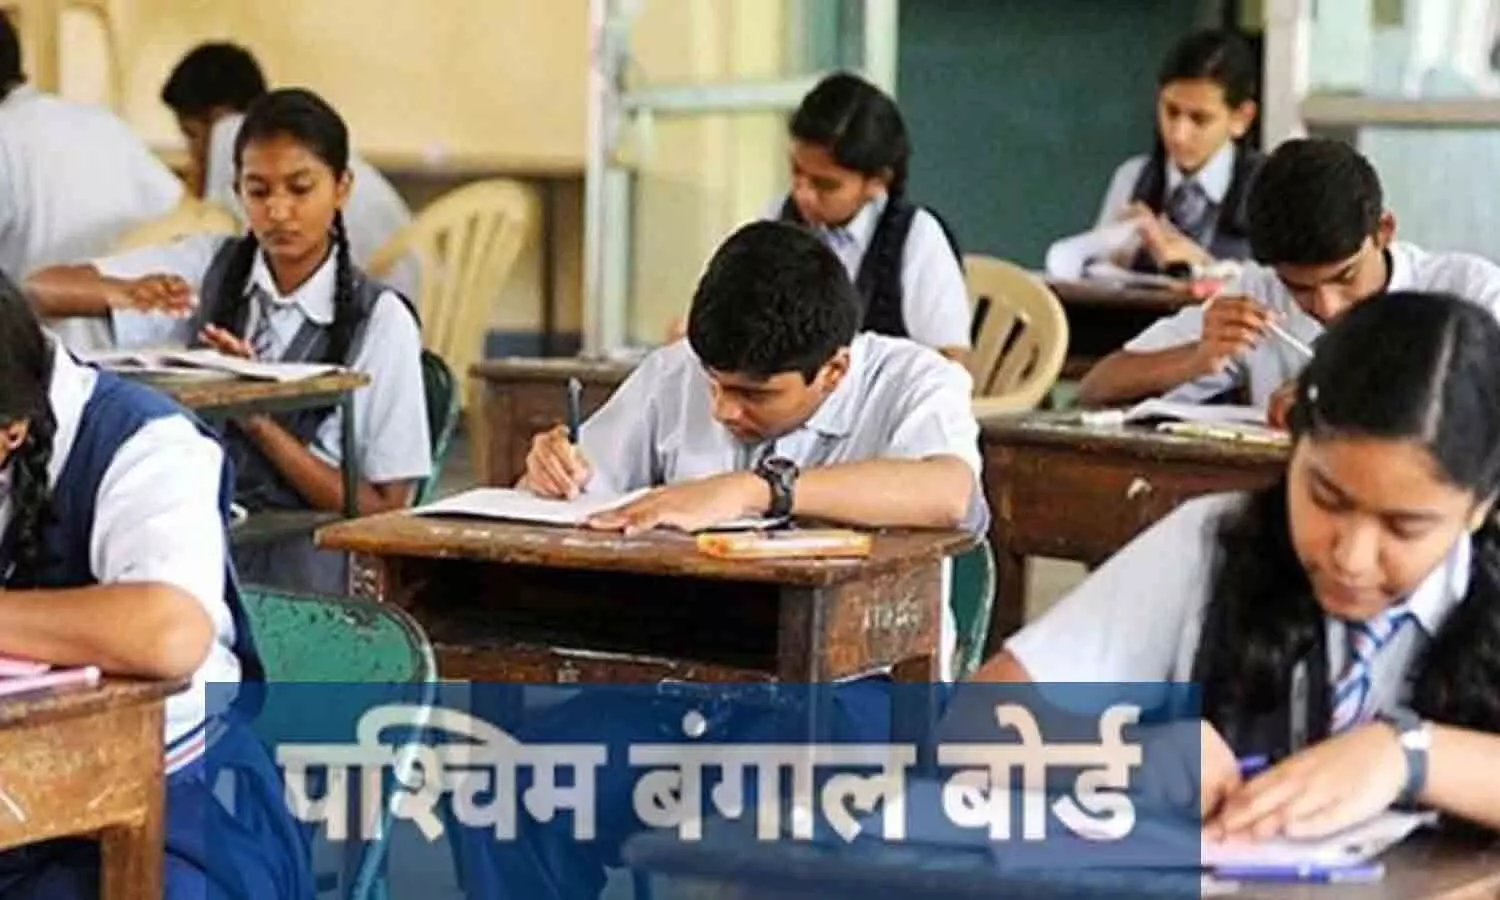 West Bengal Board Exam 2022 update 12th exam list Change due to West Bengal by election